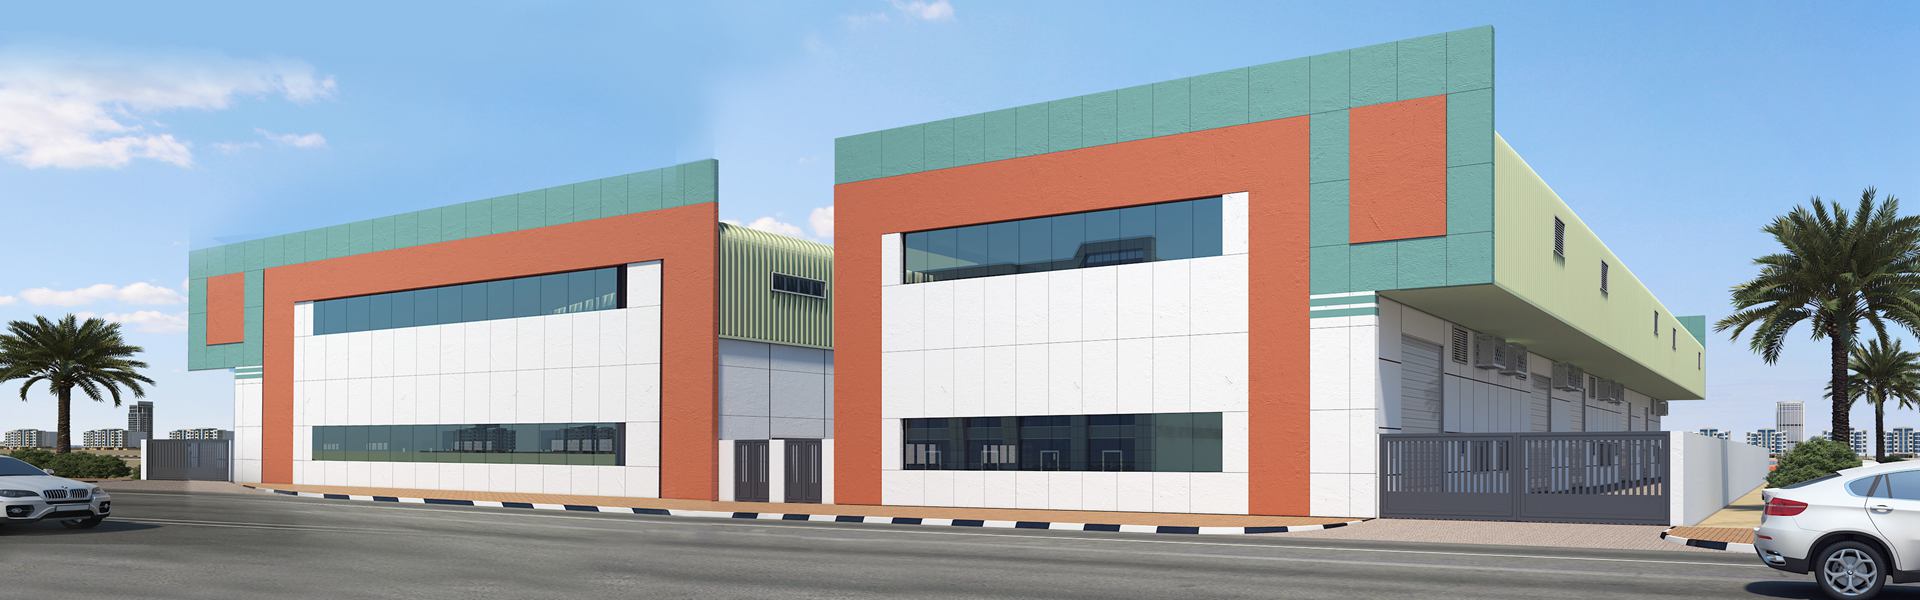 Dubai G+M Sheds with Mezzanine and Curve Eave in UAE